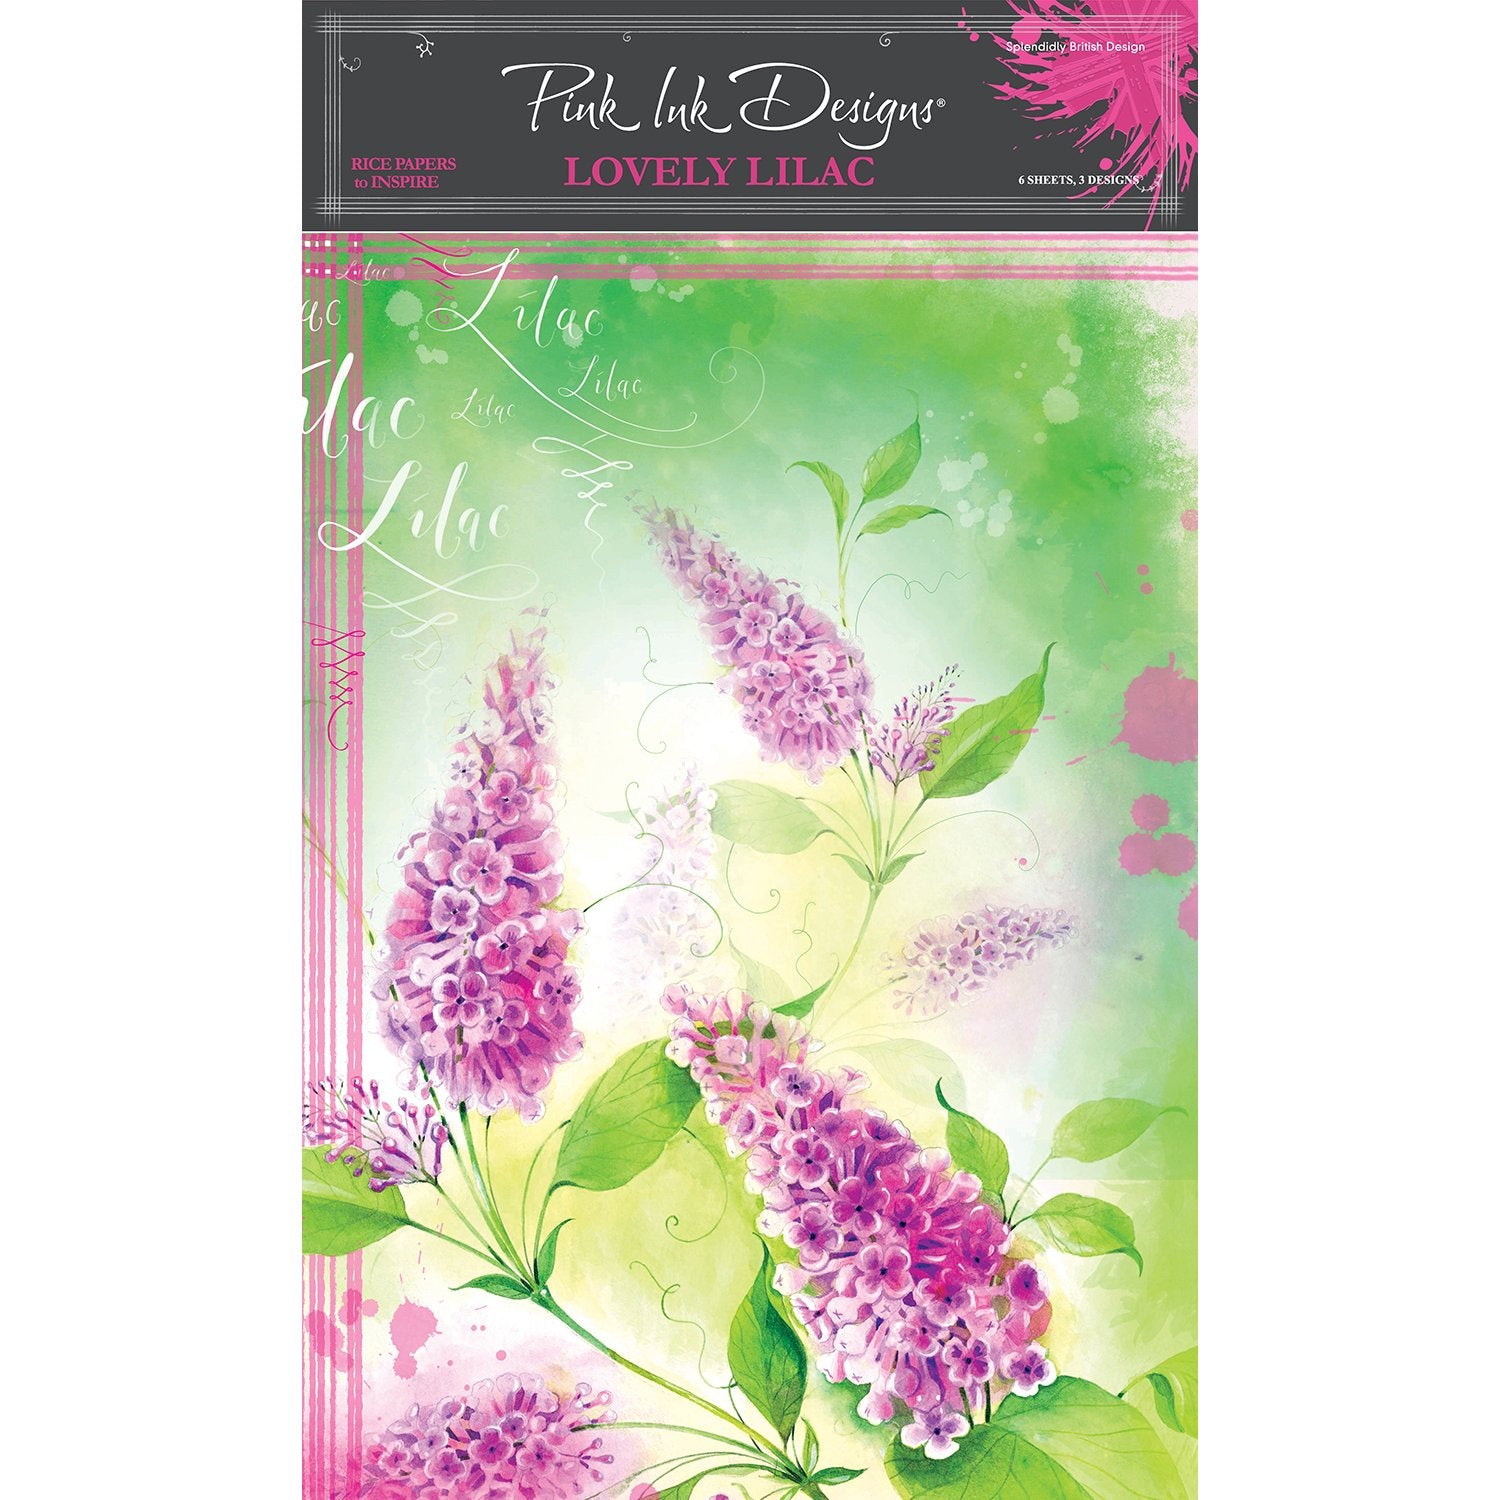 Lovely Lilac A4 Rice Paper